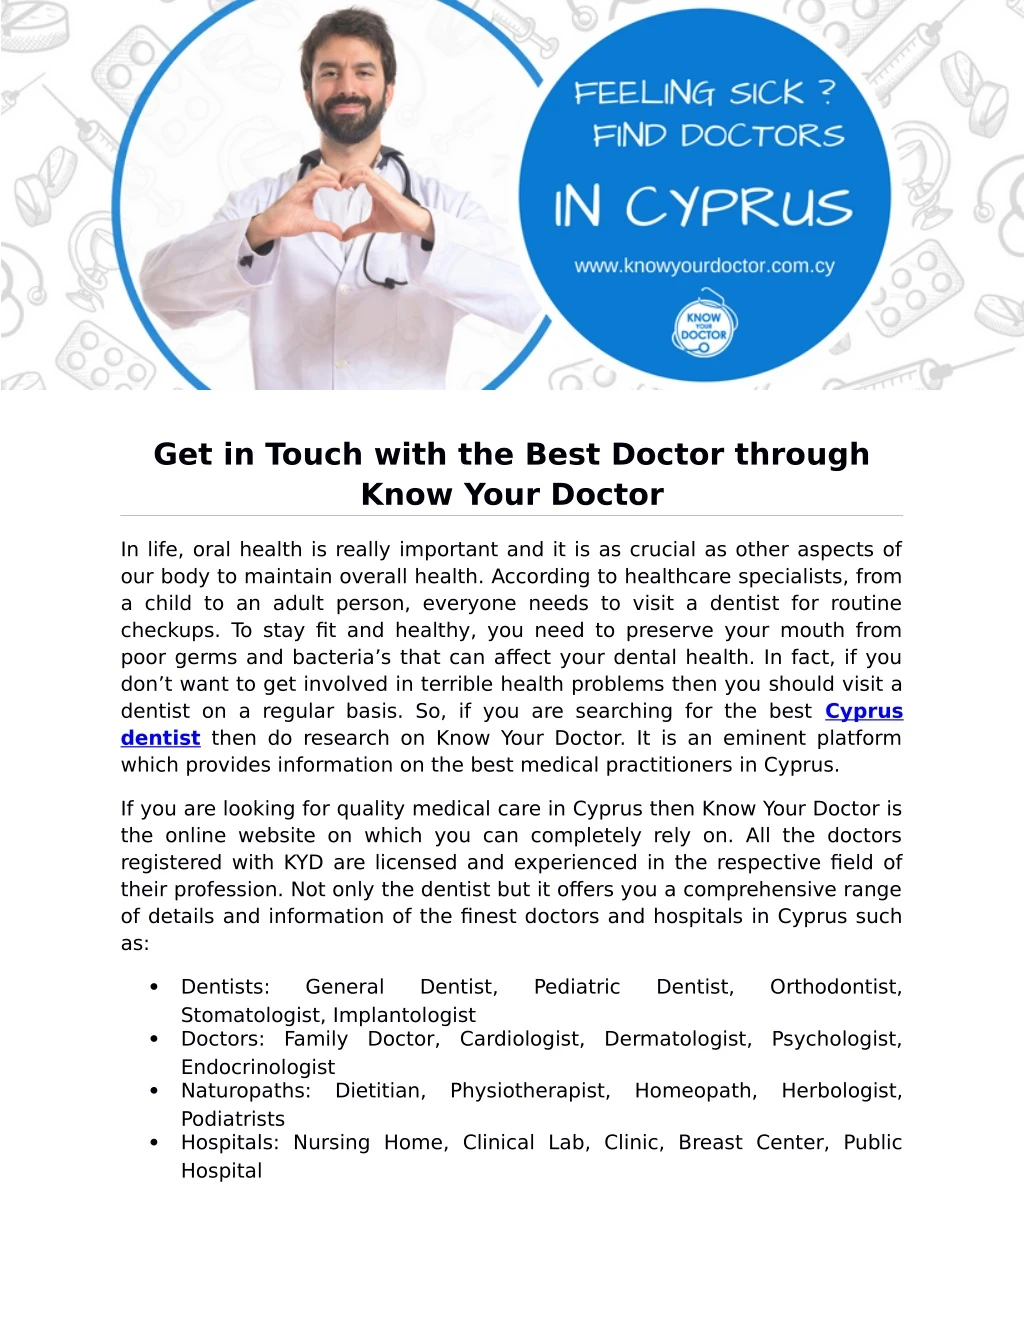 get in touch with the best doctor through know